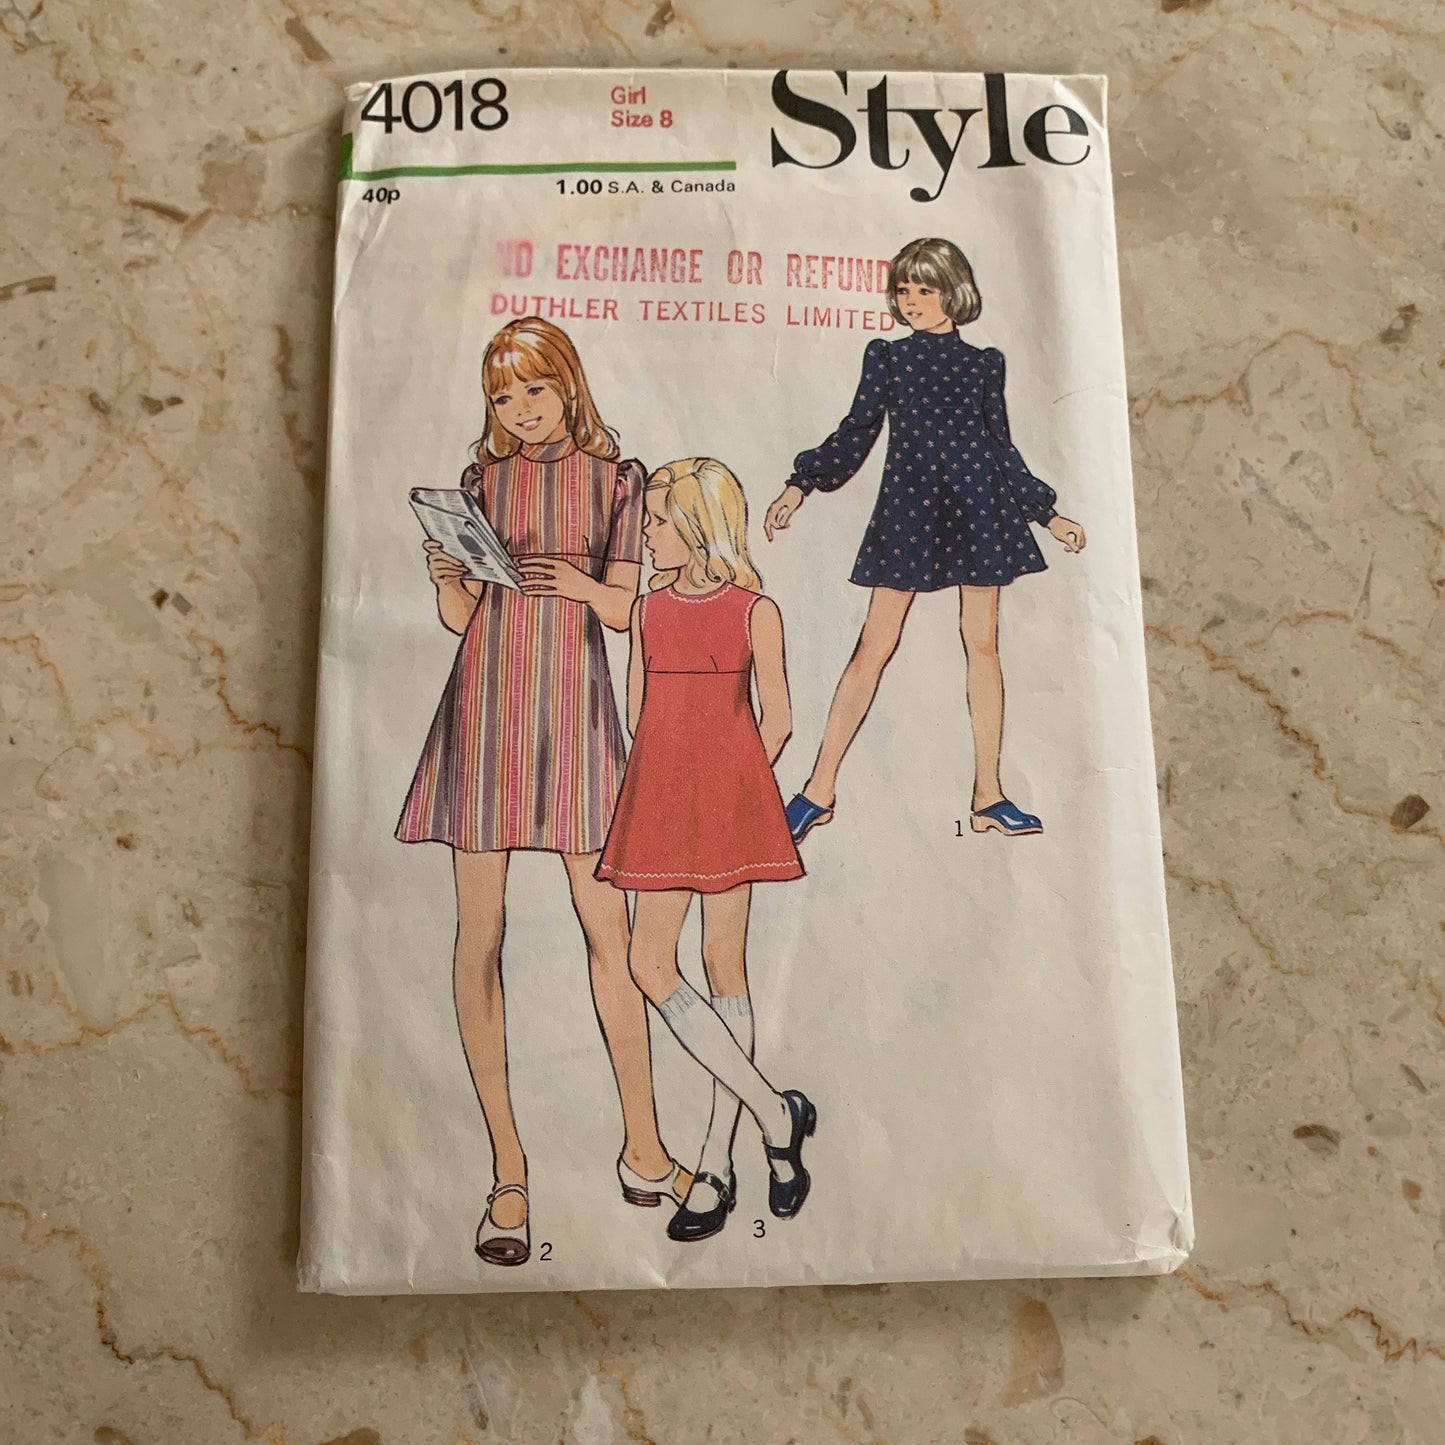 Girl’s Size 8 Dress with Short Puff Sleeves or Sleeveless Vintage Sewing Pattern Style 4018